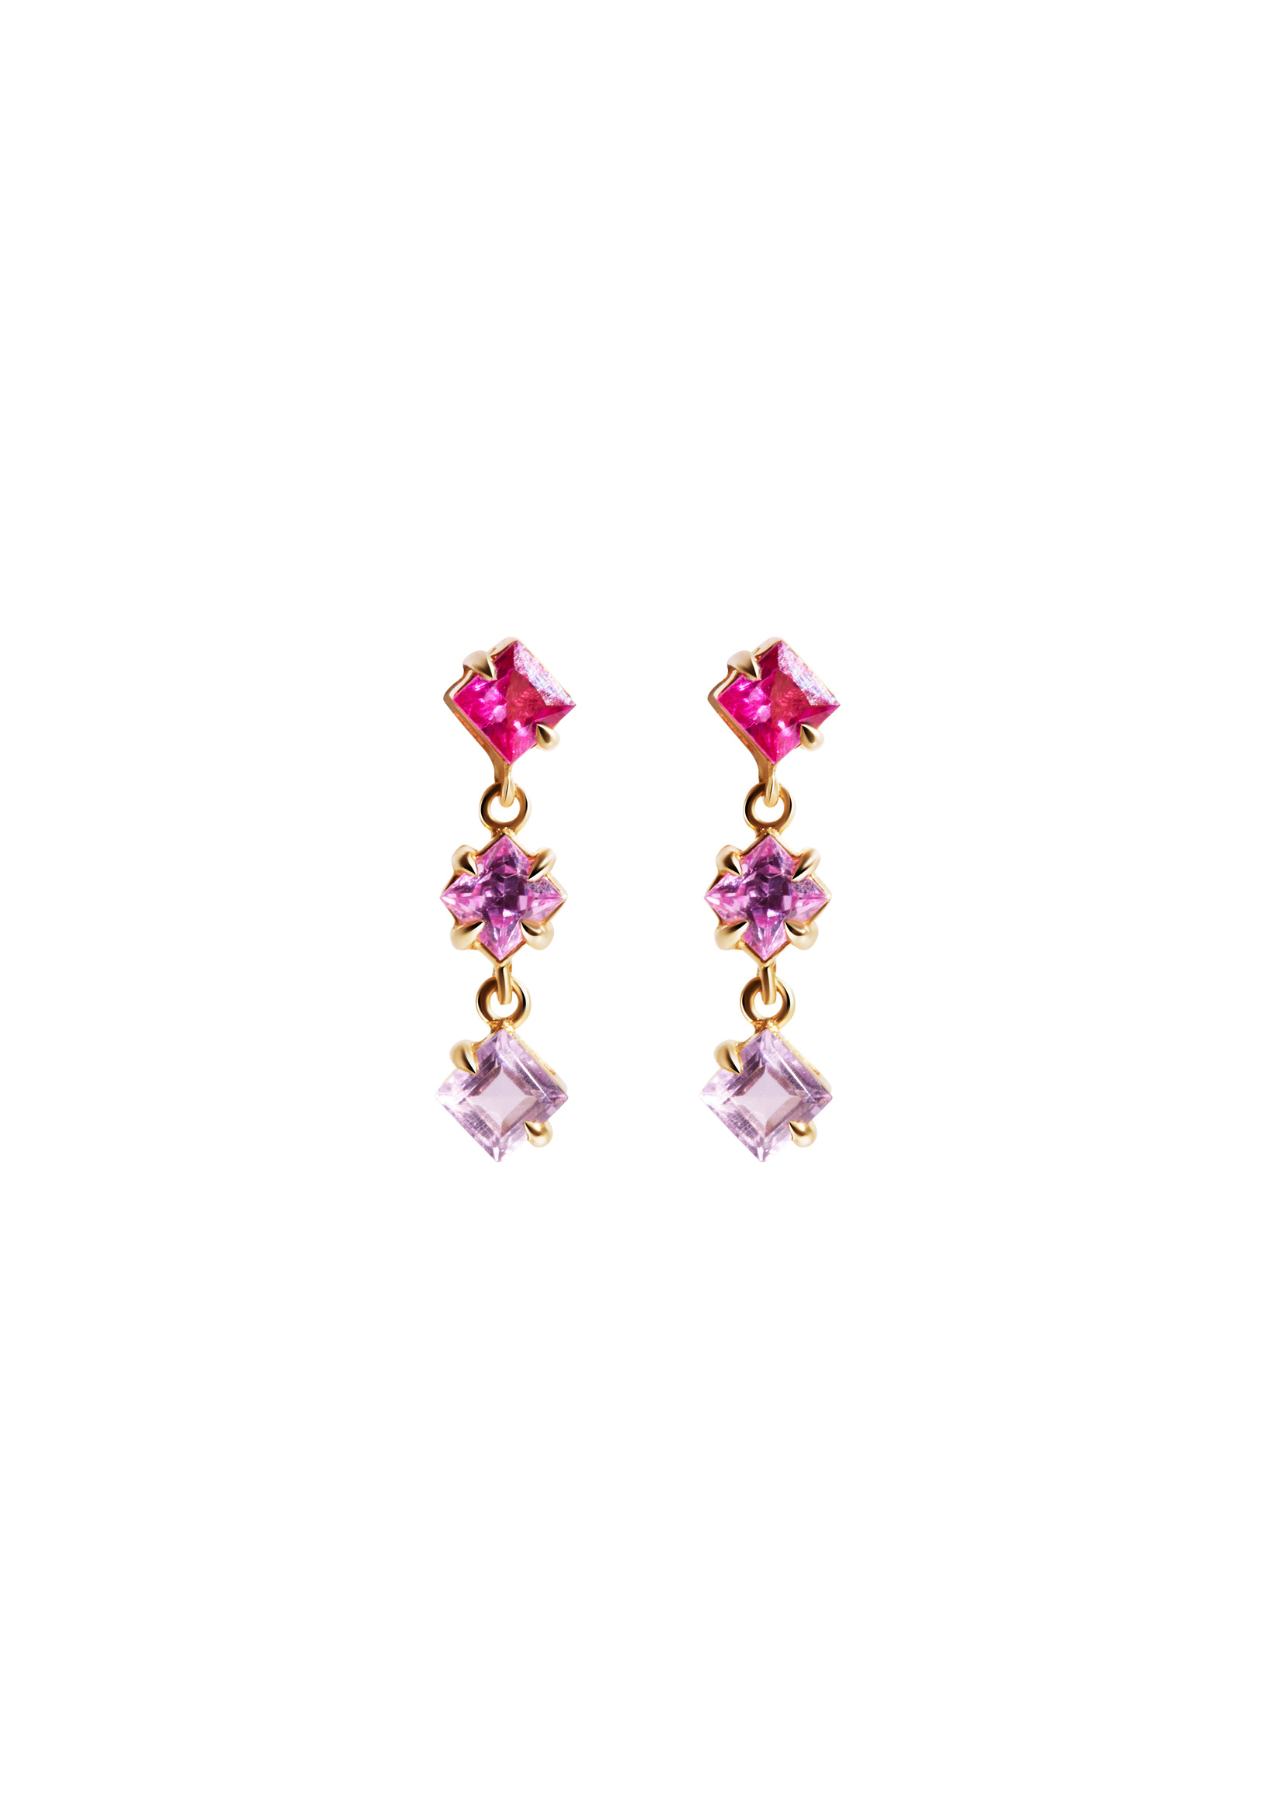 The Rosco Three 9ct Solid Gold Drop Earrings